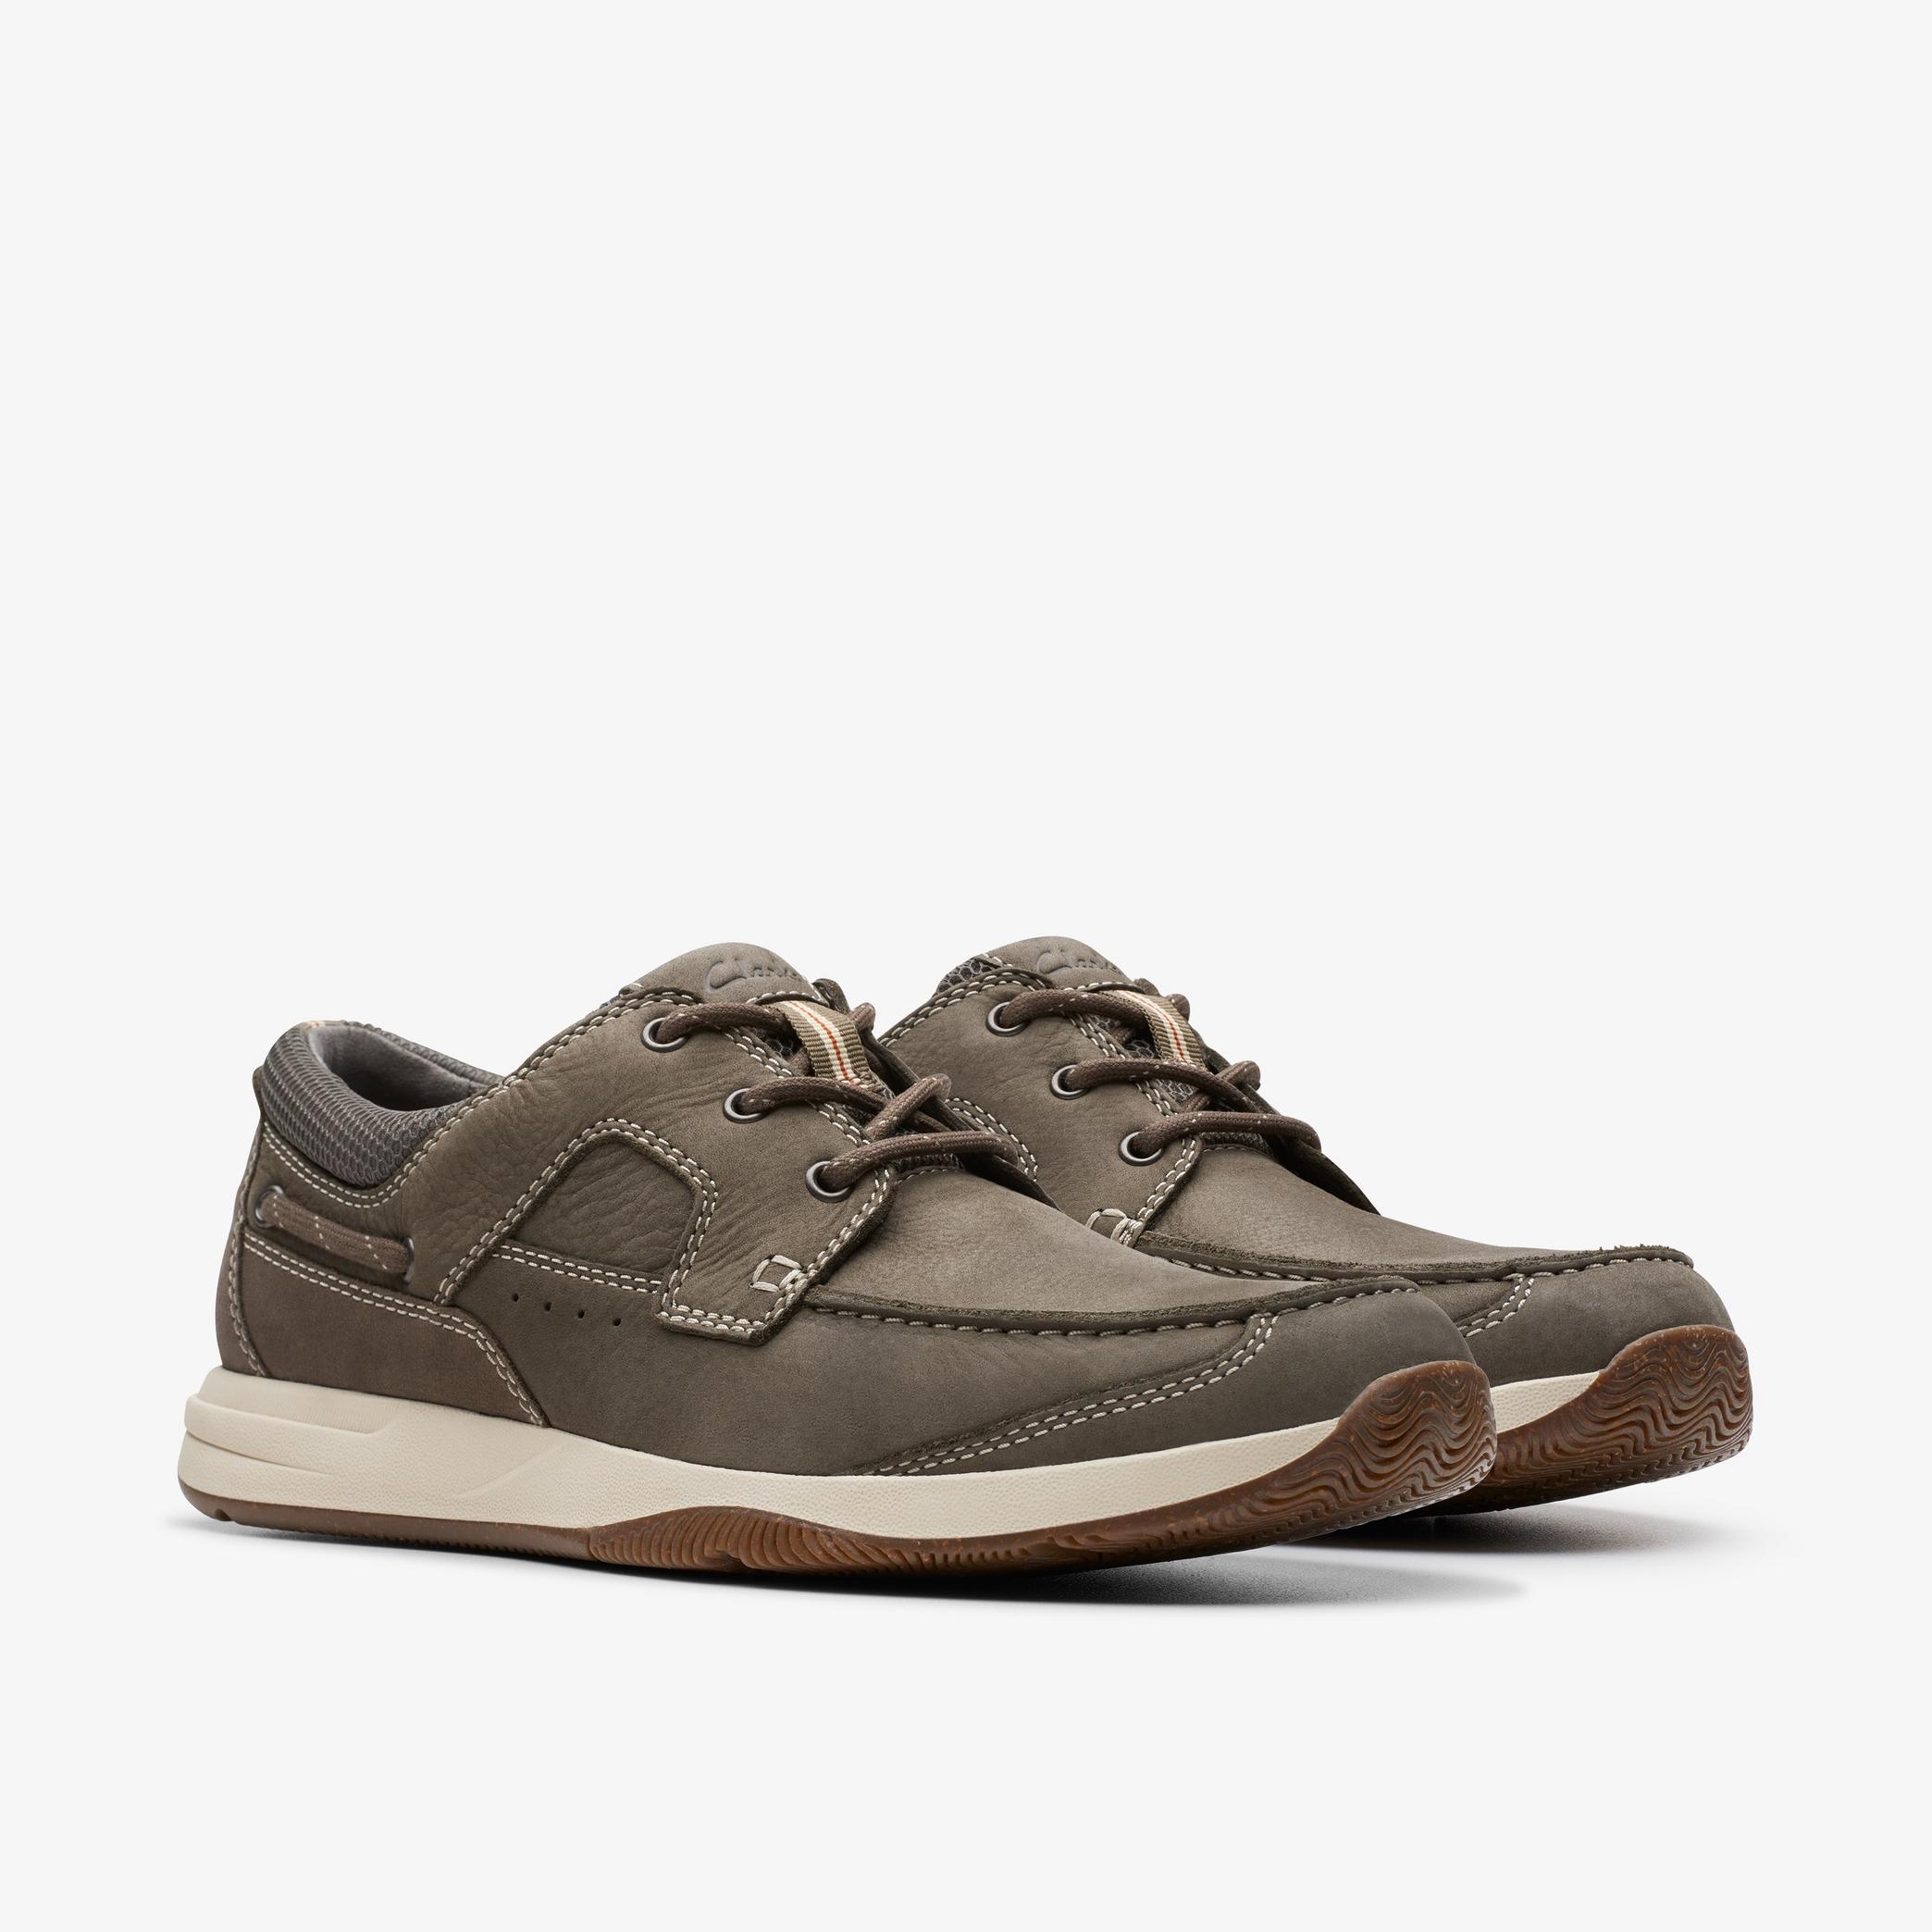 Sailview Lace Taupe Nubuck Boat Shoes, view 4 of 6